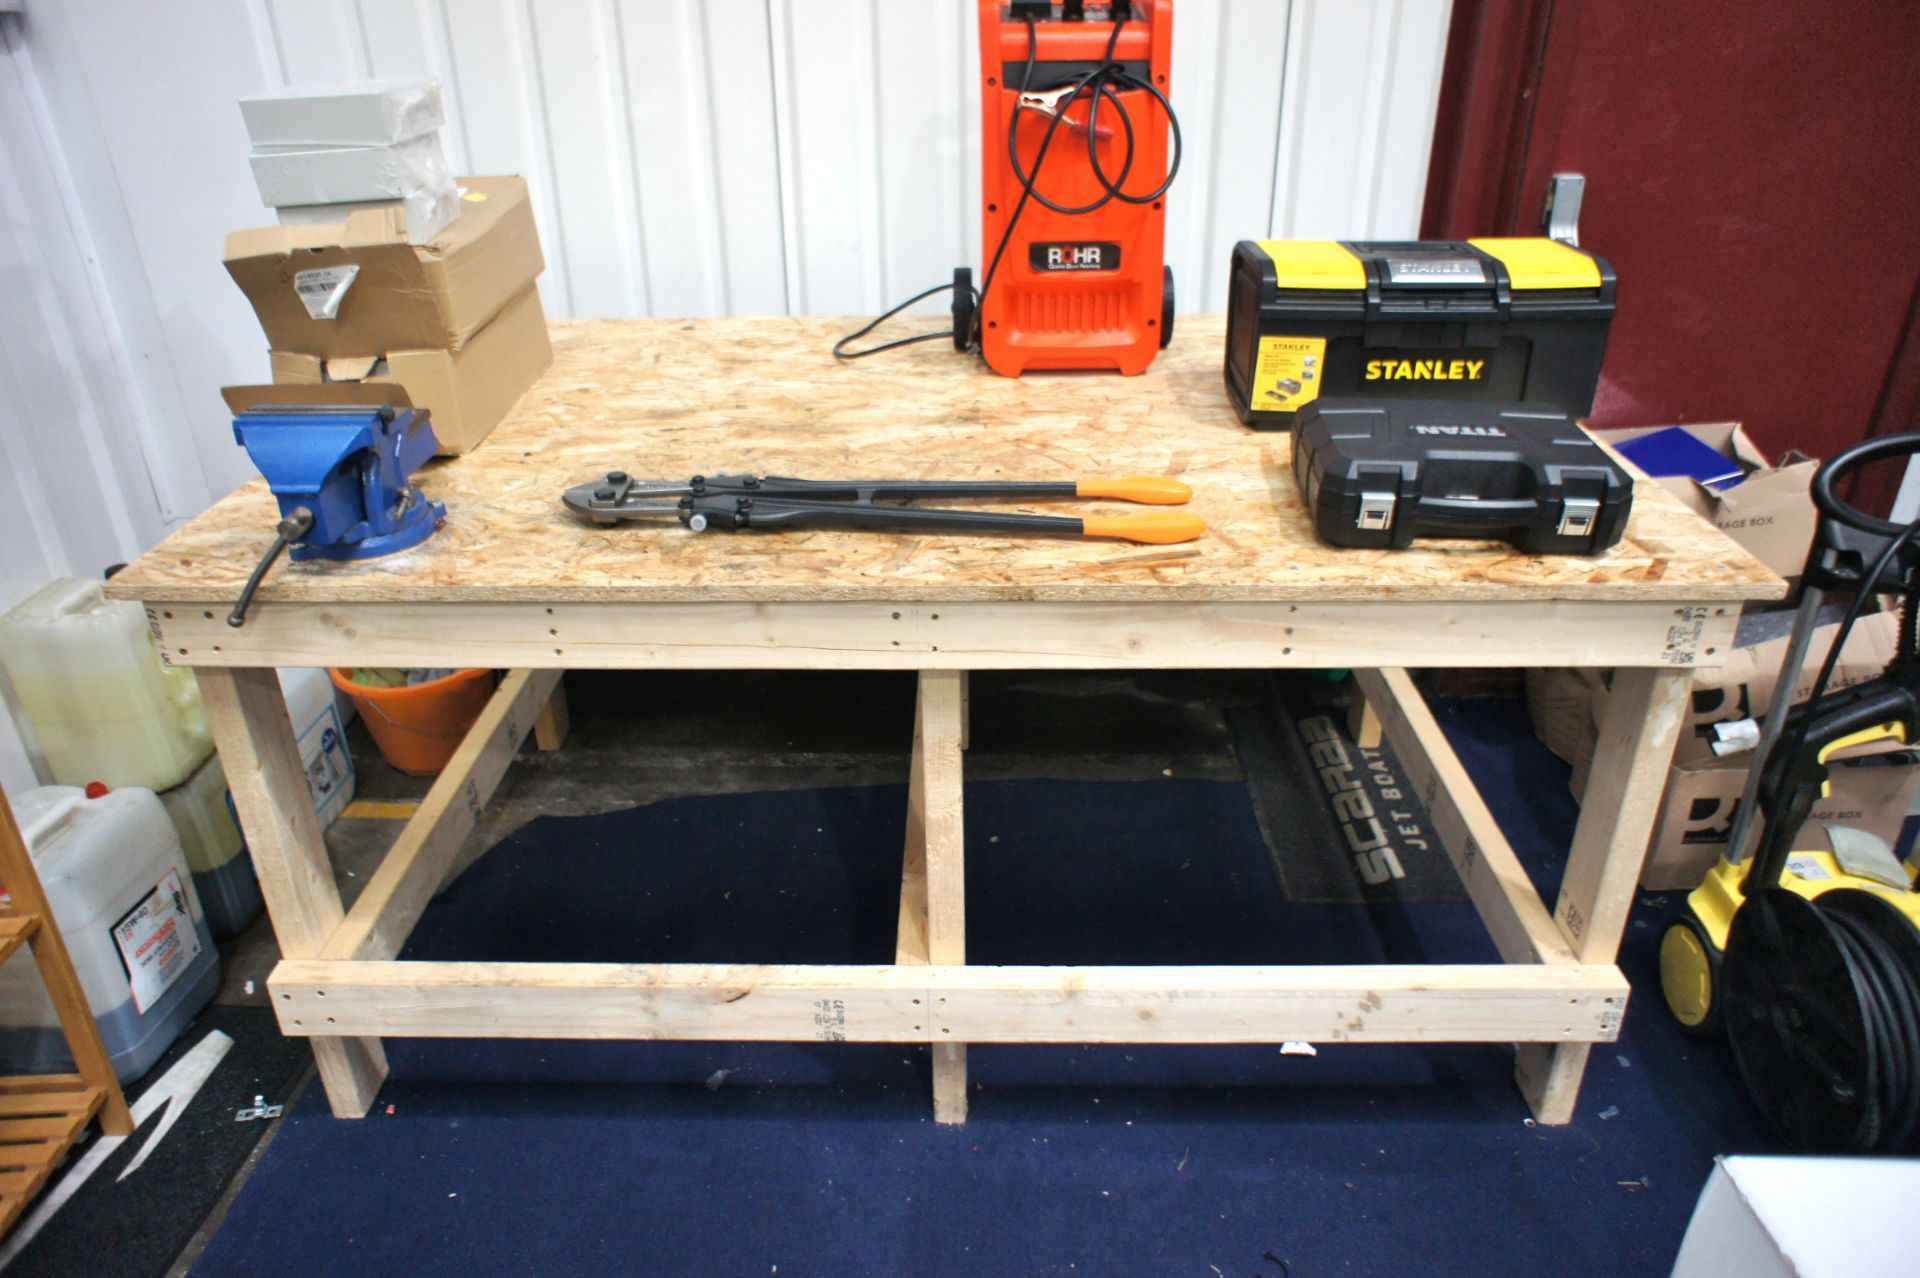 Timber workbench, 6 ft. x 4 ft. with 6" vice